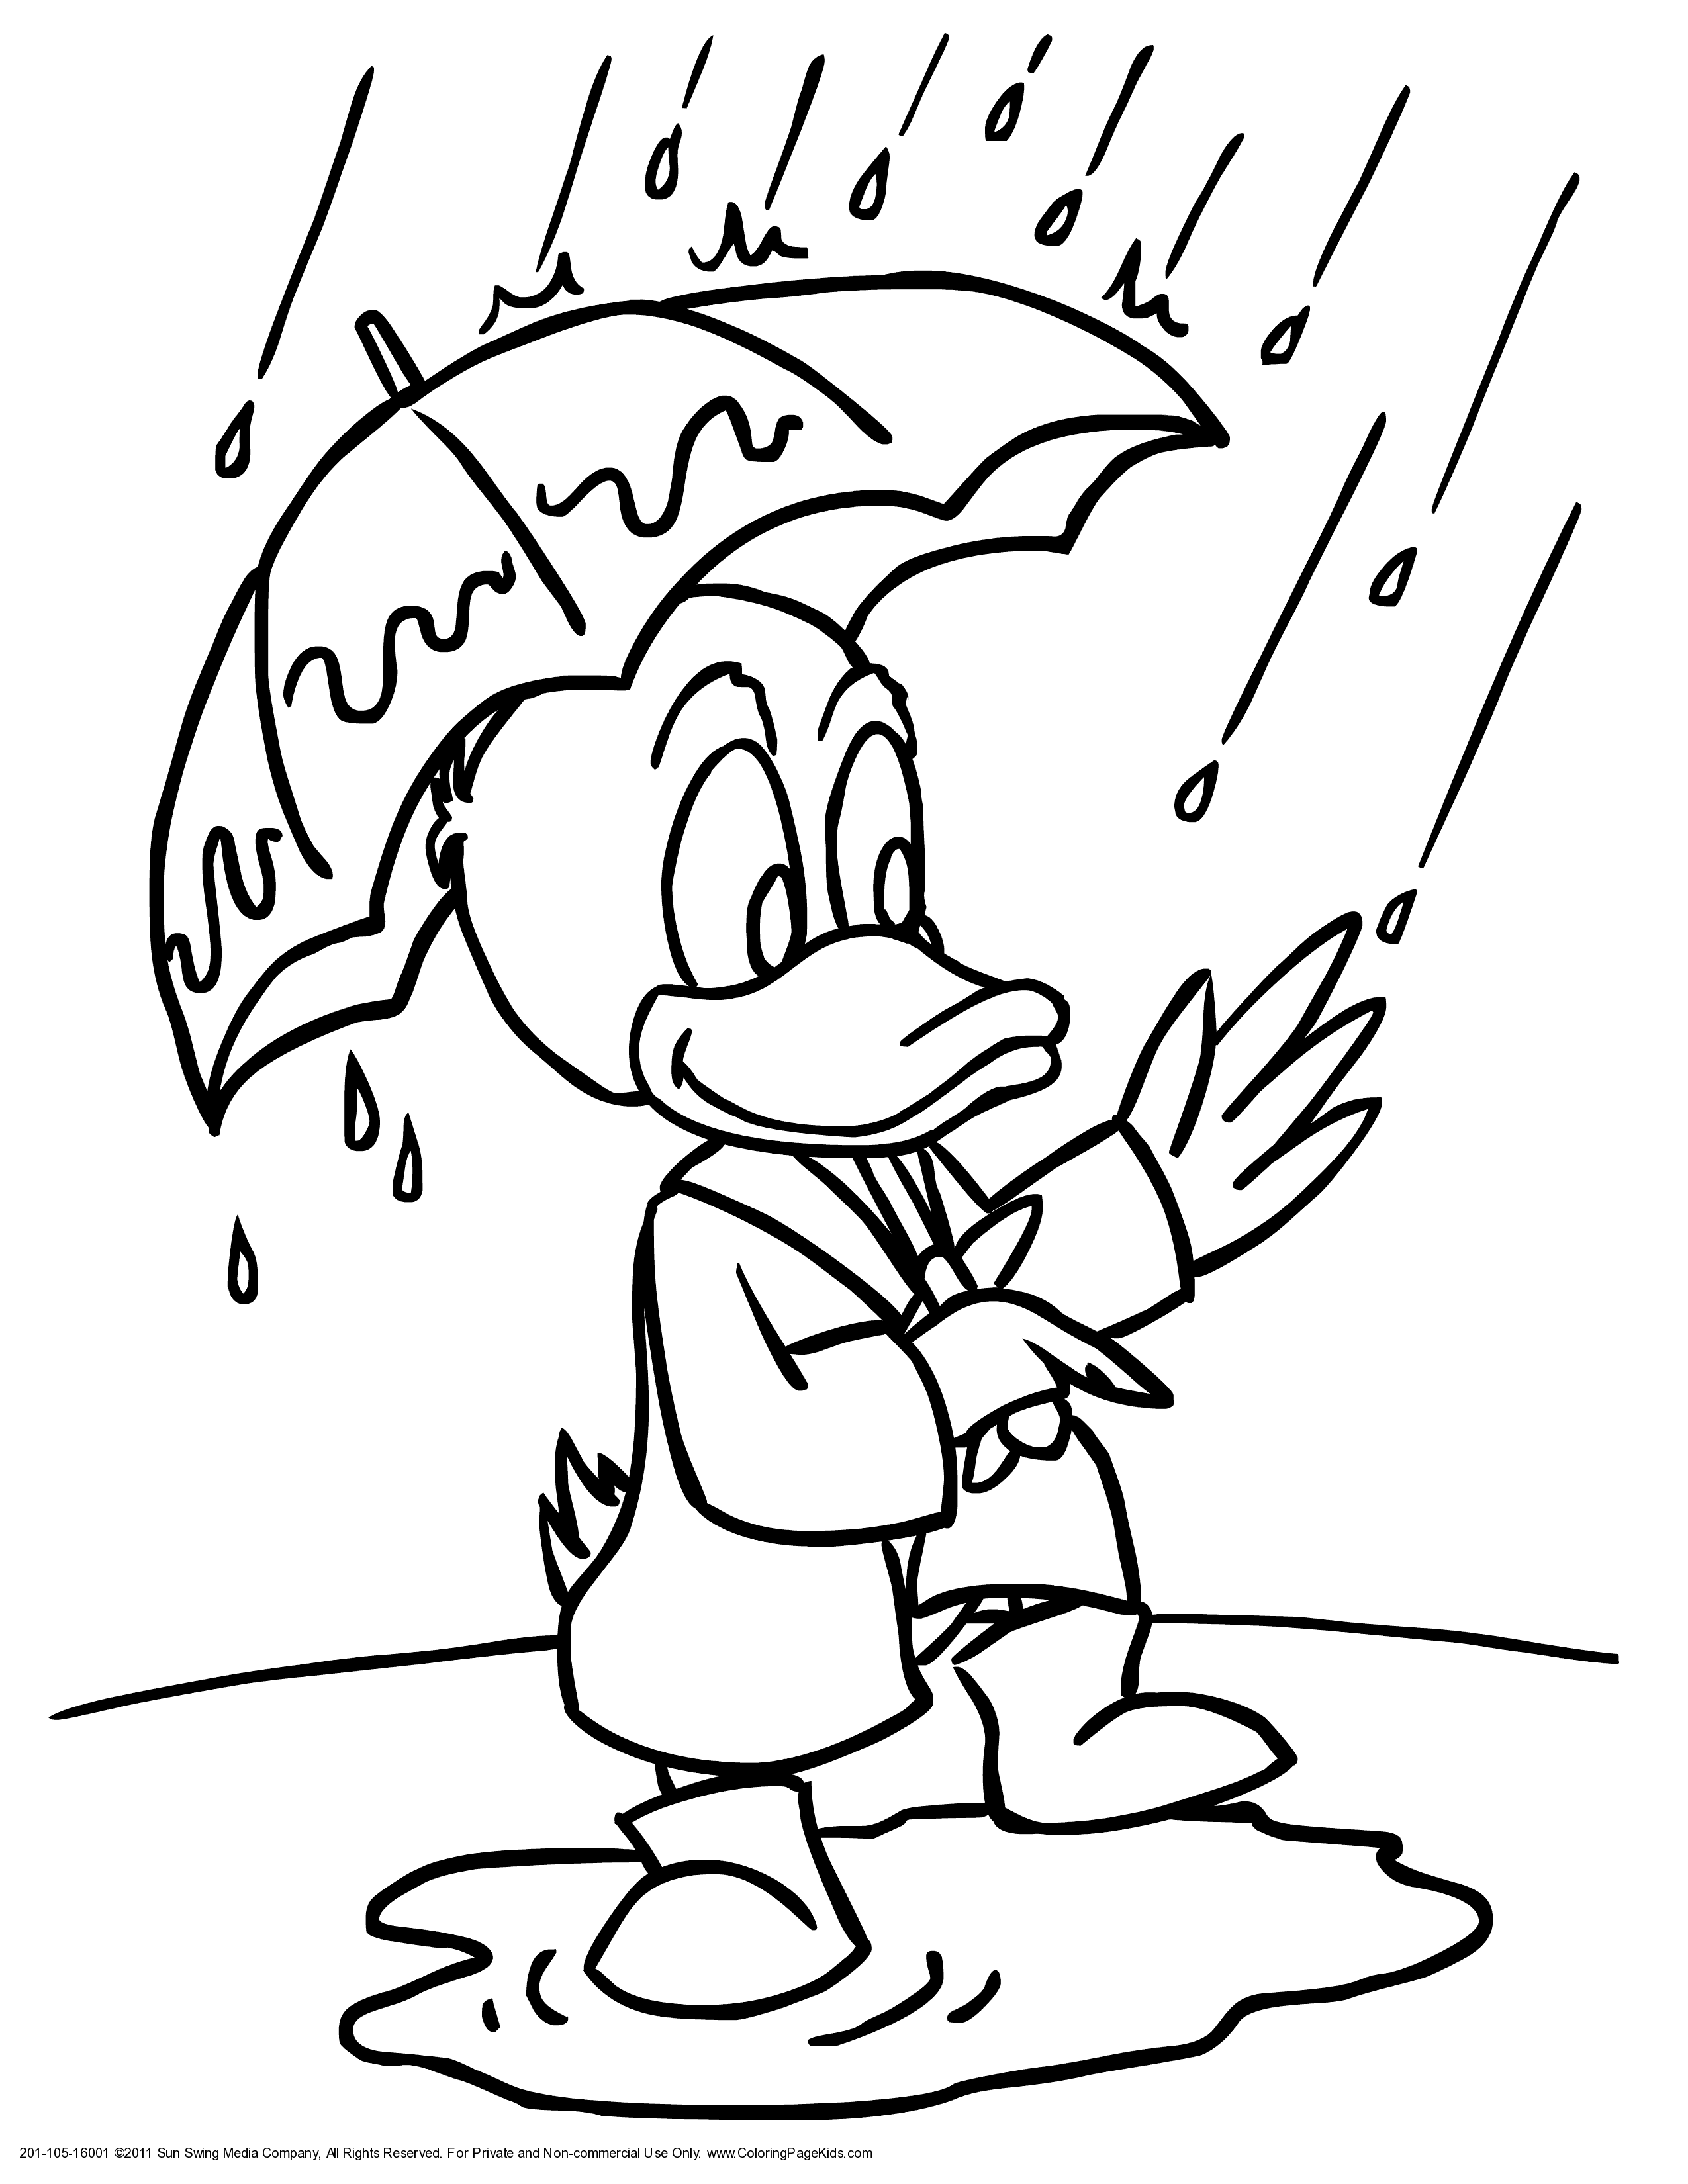 rain coloring page rain coloring pages to download and print for free page rain coloring 1 2